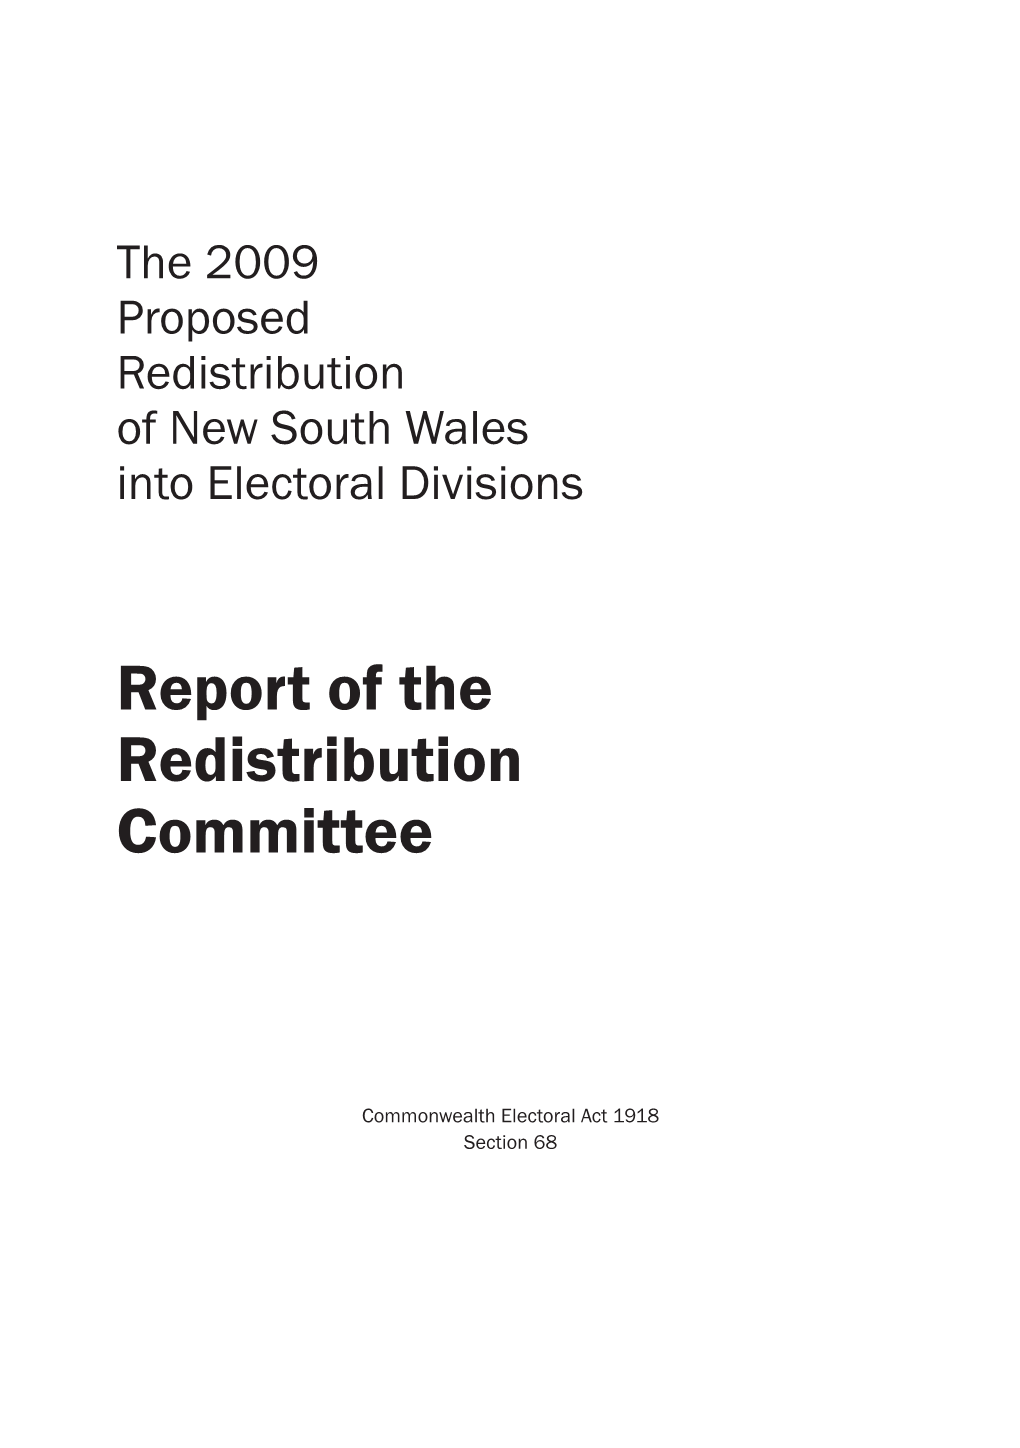 Report of the Redistribution Committee